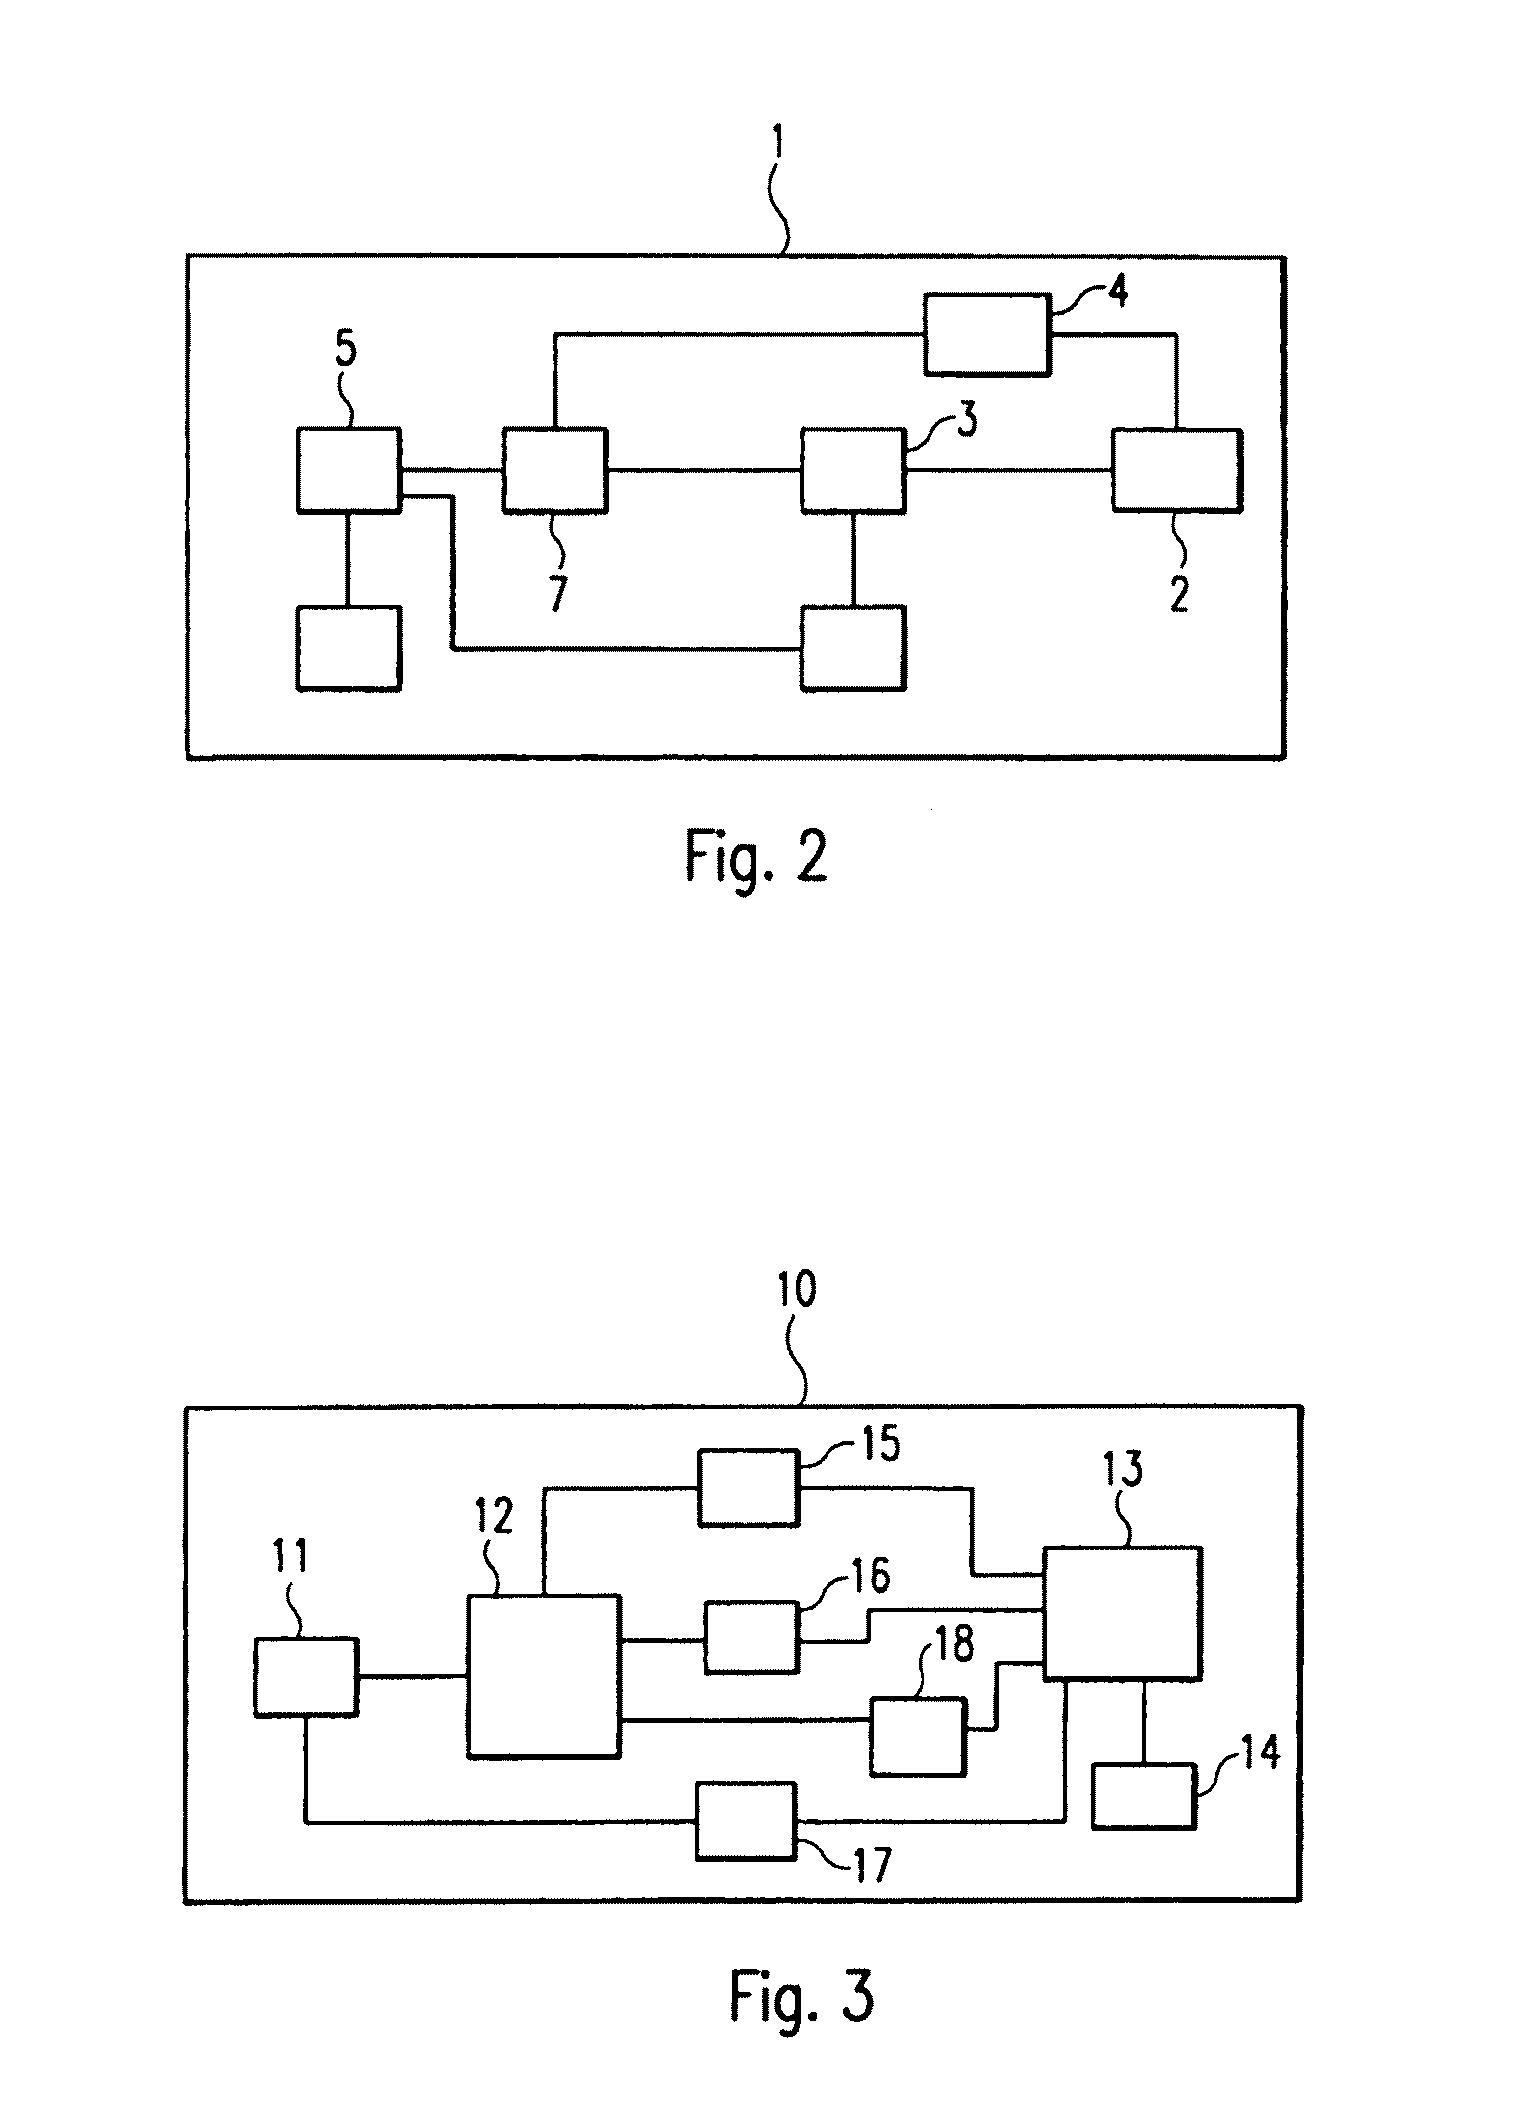 Transmitting device, receiving device and method for establishing a wireless communication link